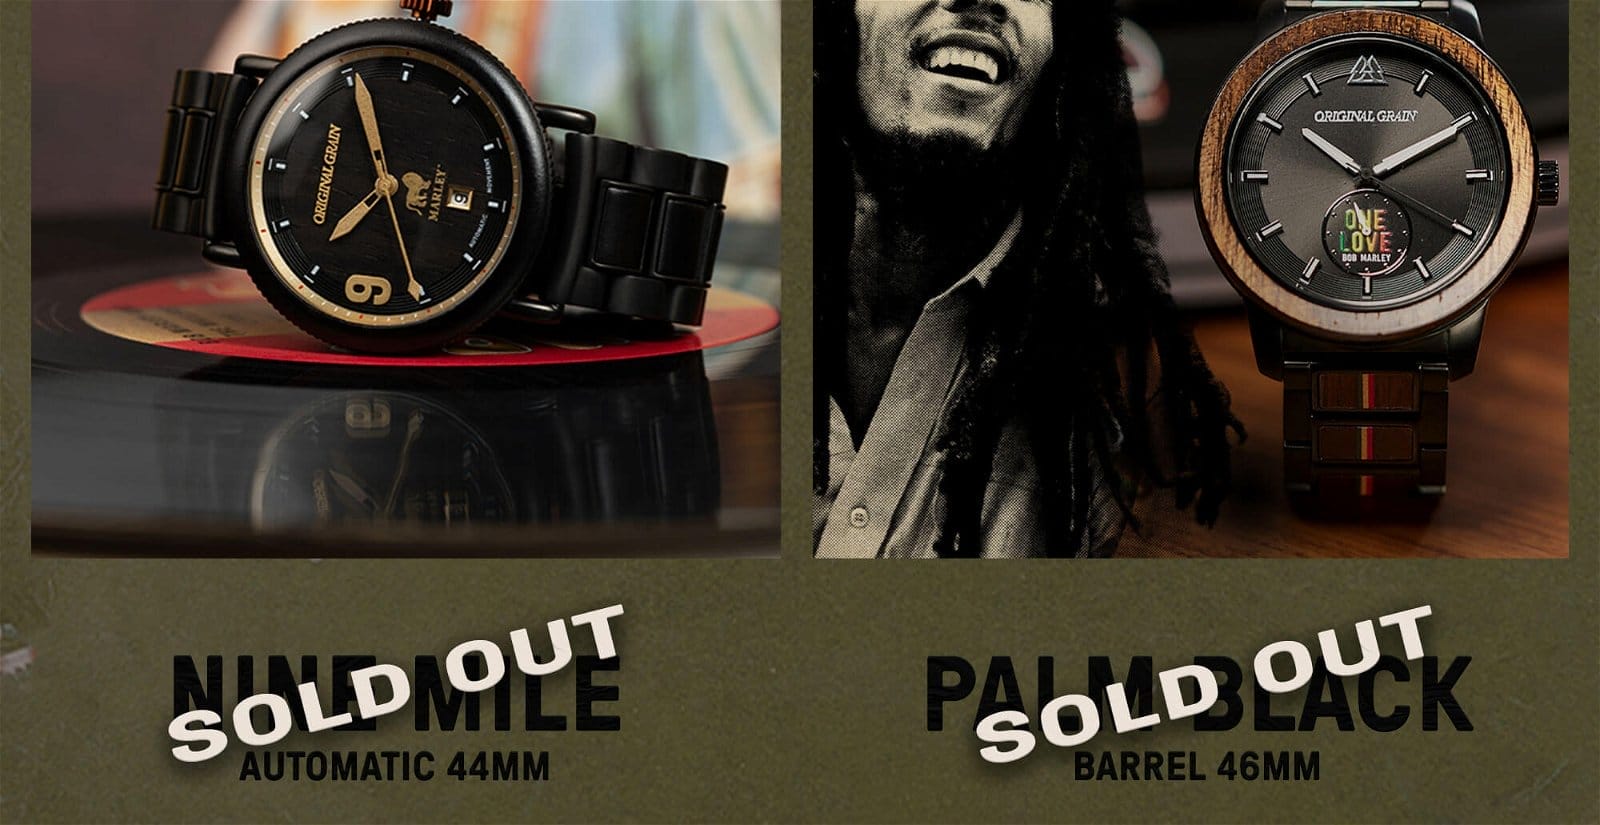 Original Grain's Partnership with Bob Marley Sold Out Styles